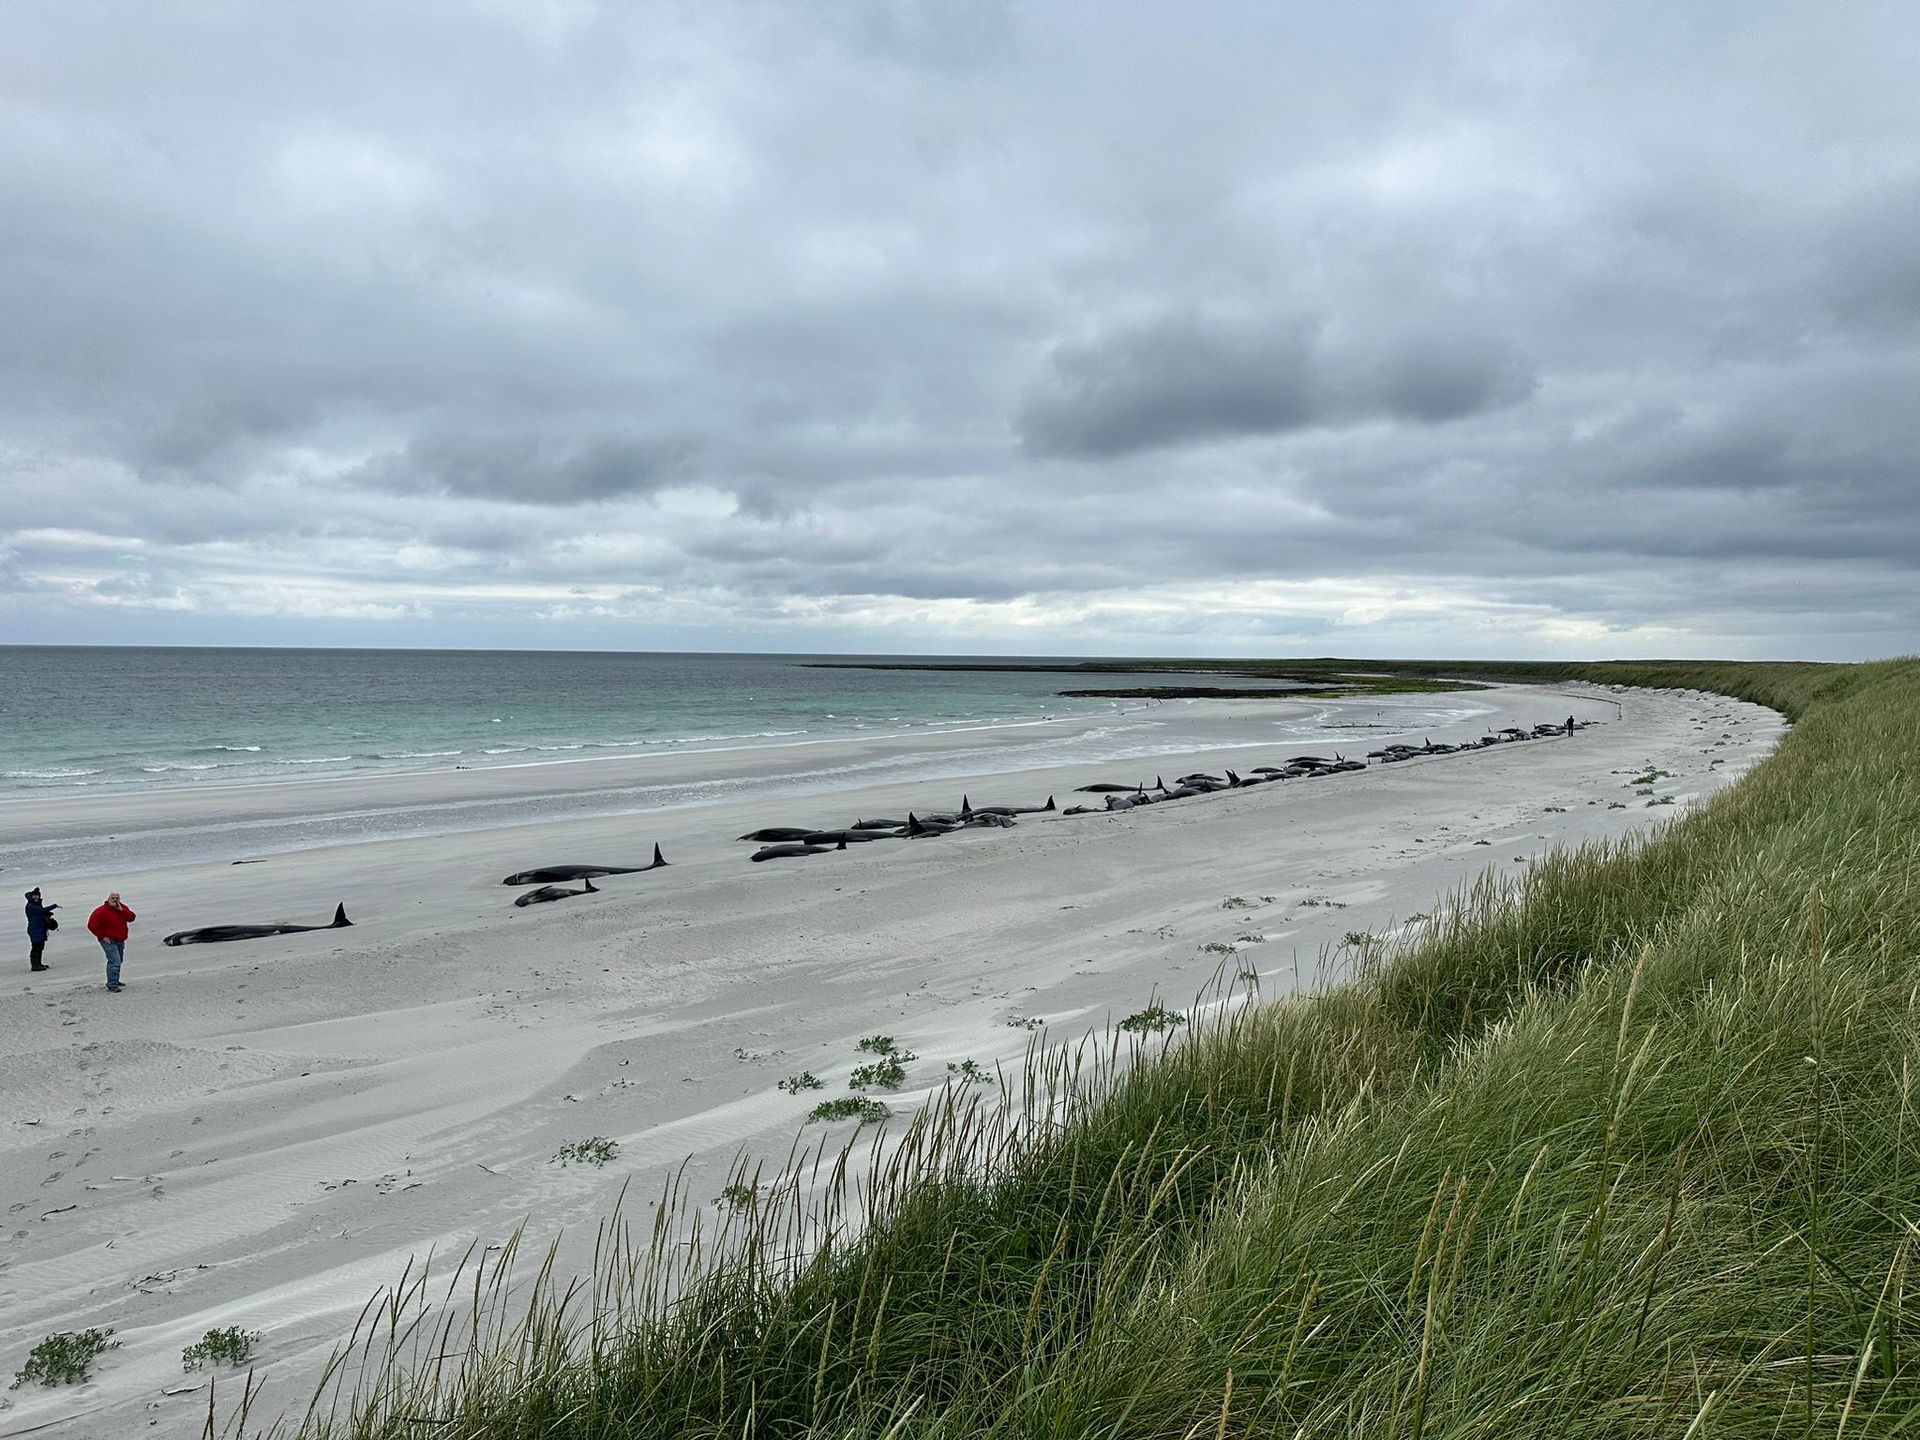 Around 77 of the animals were discovered high up on the isle of Sanday.